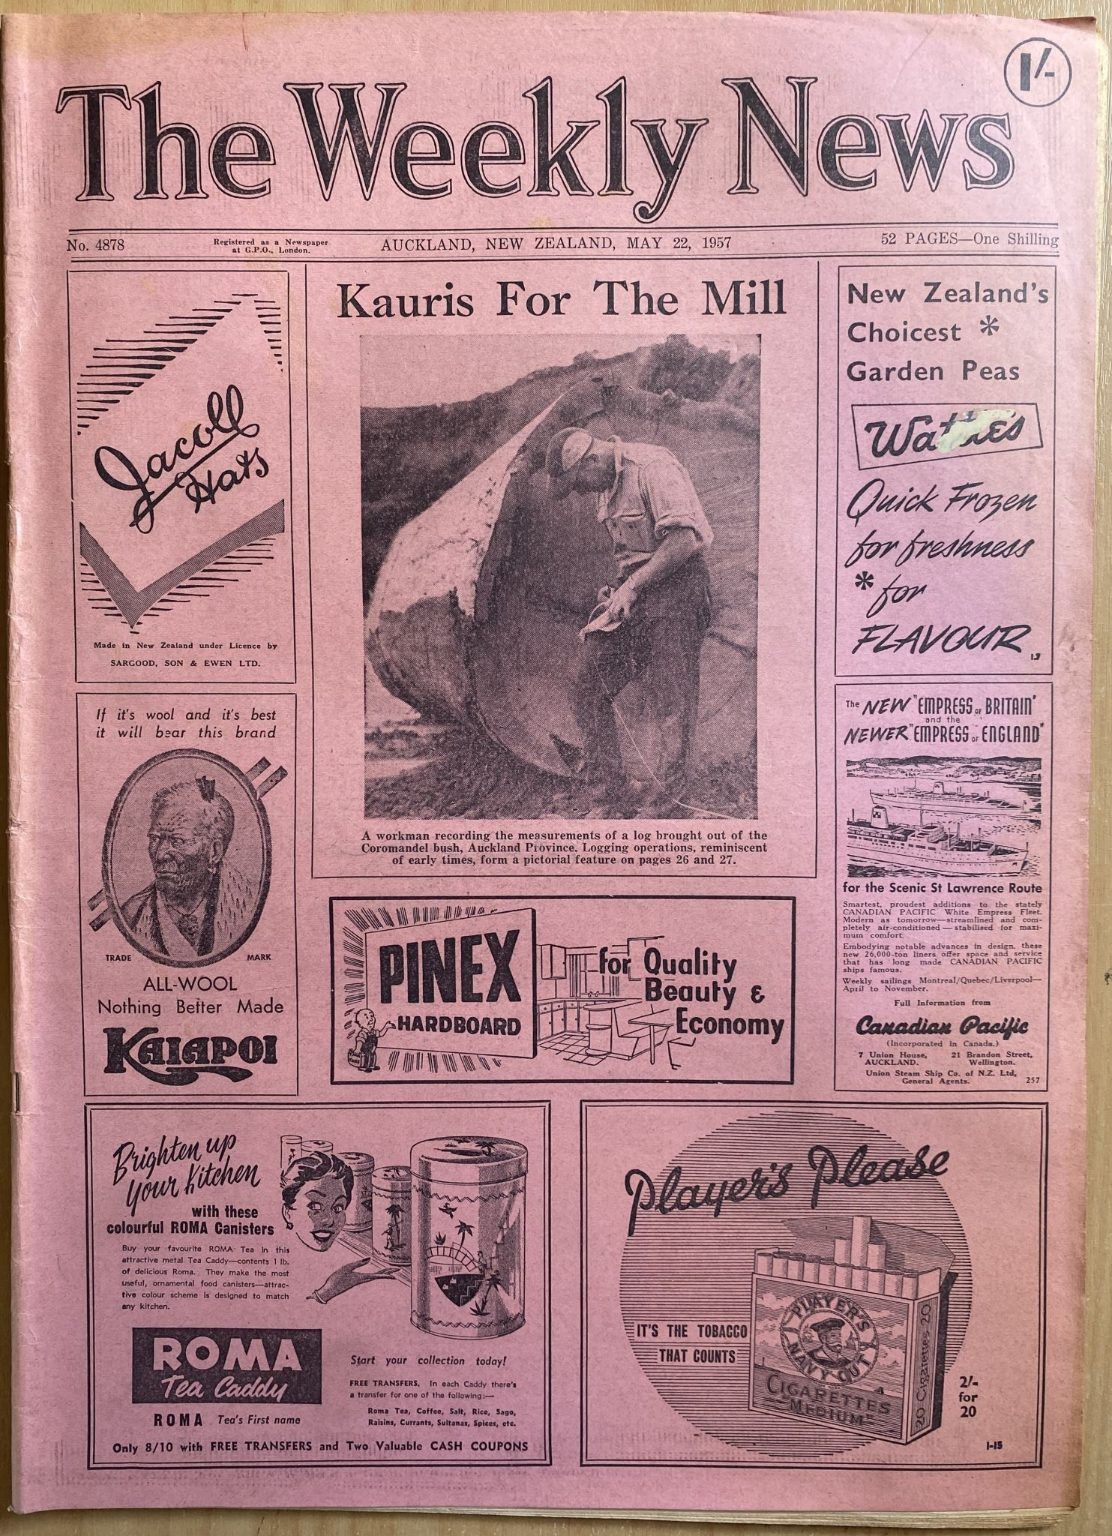 OLD NEWSPAPER: The Weekly News, No. 4878, 22 May 1957